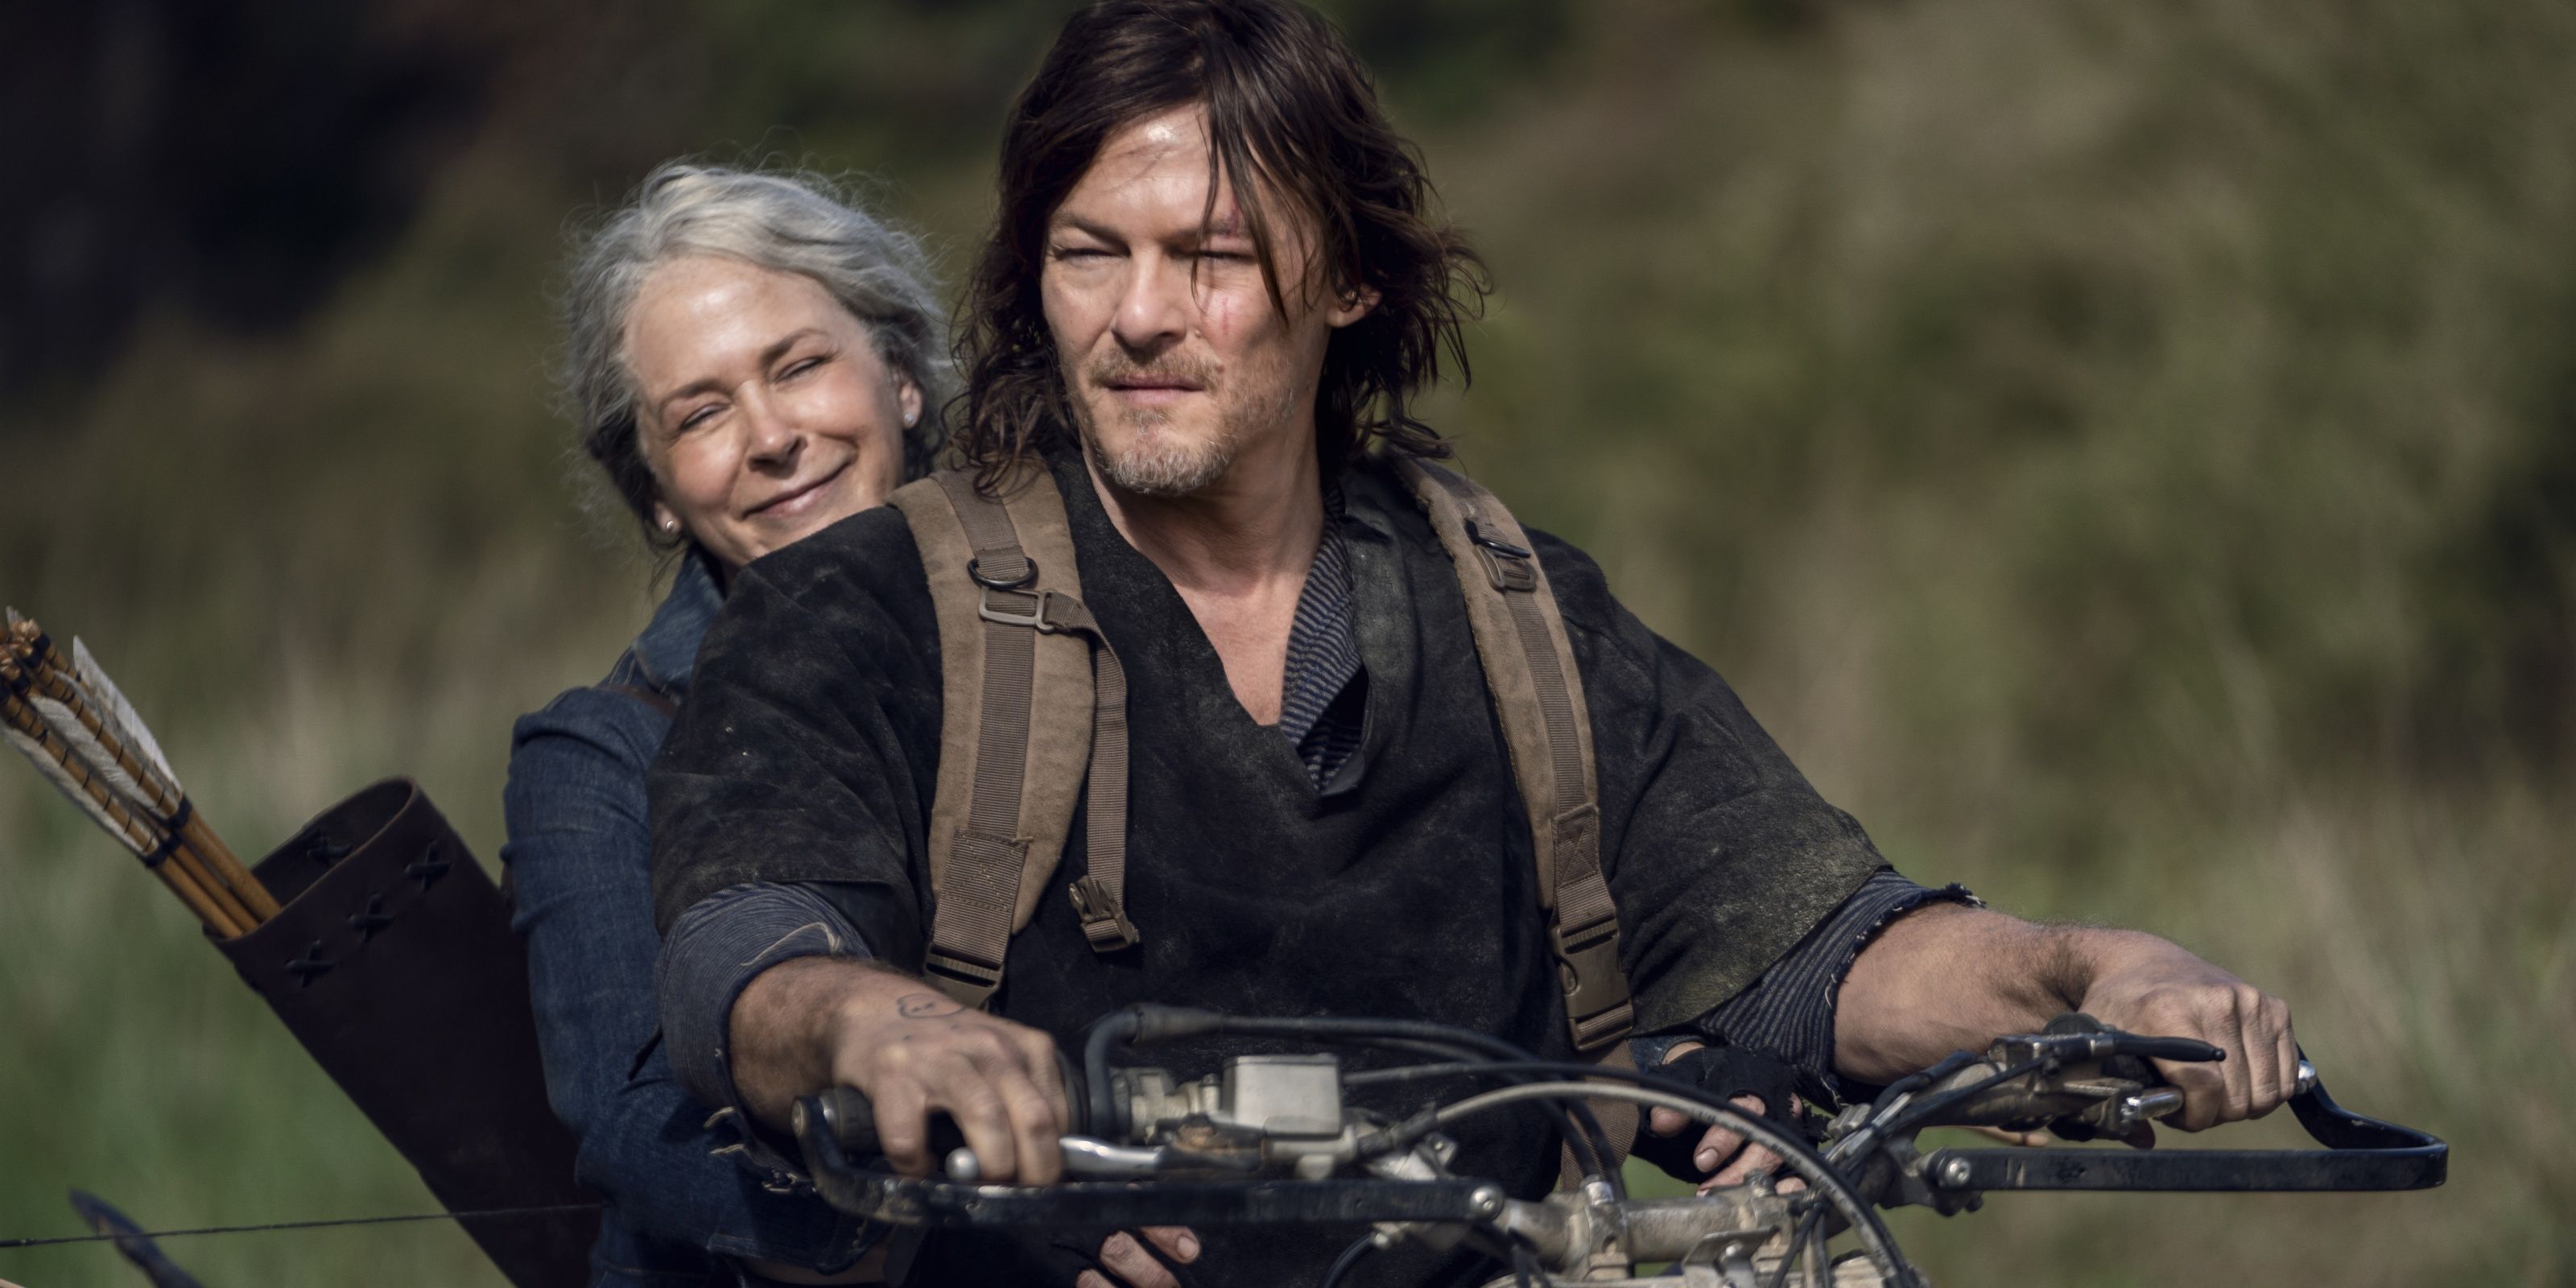 daryl and carol on motorcycle